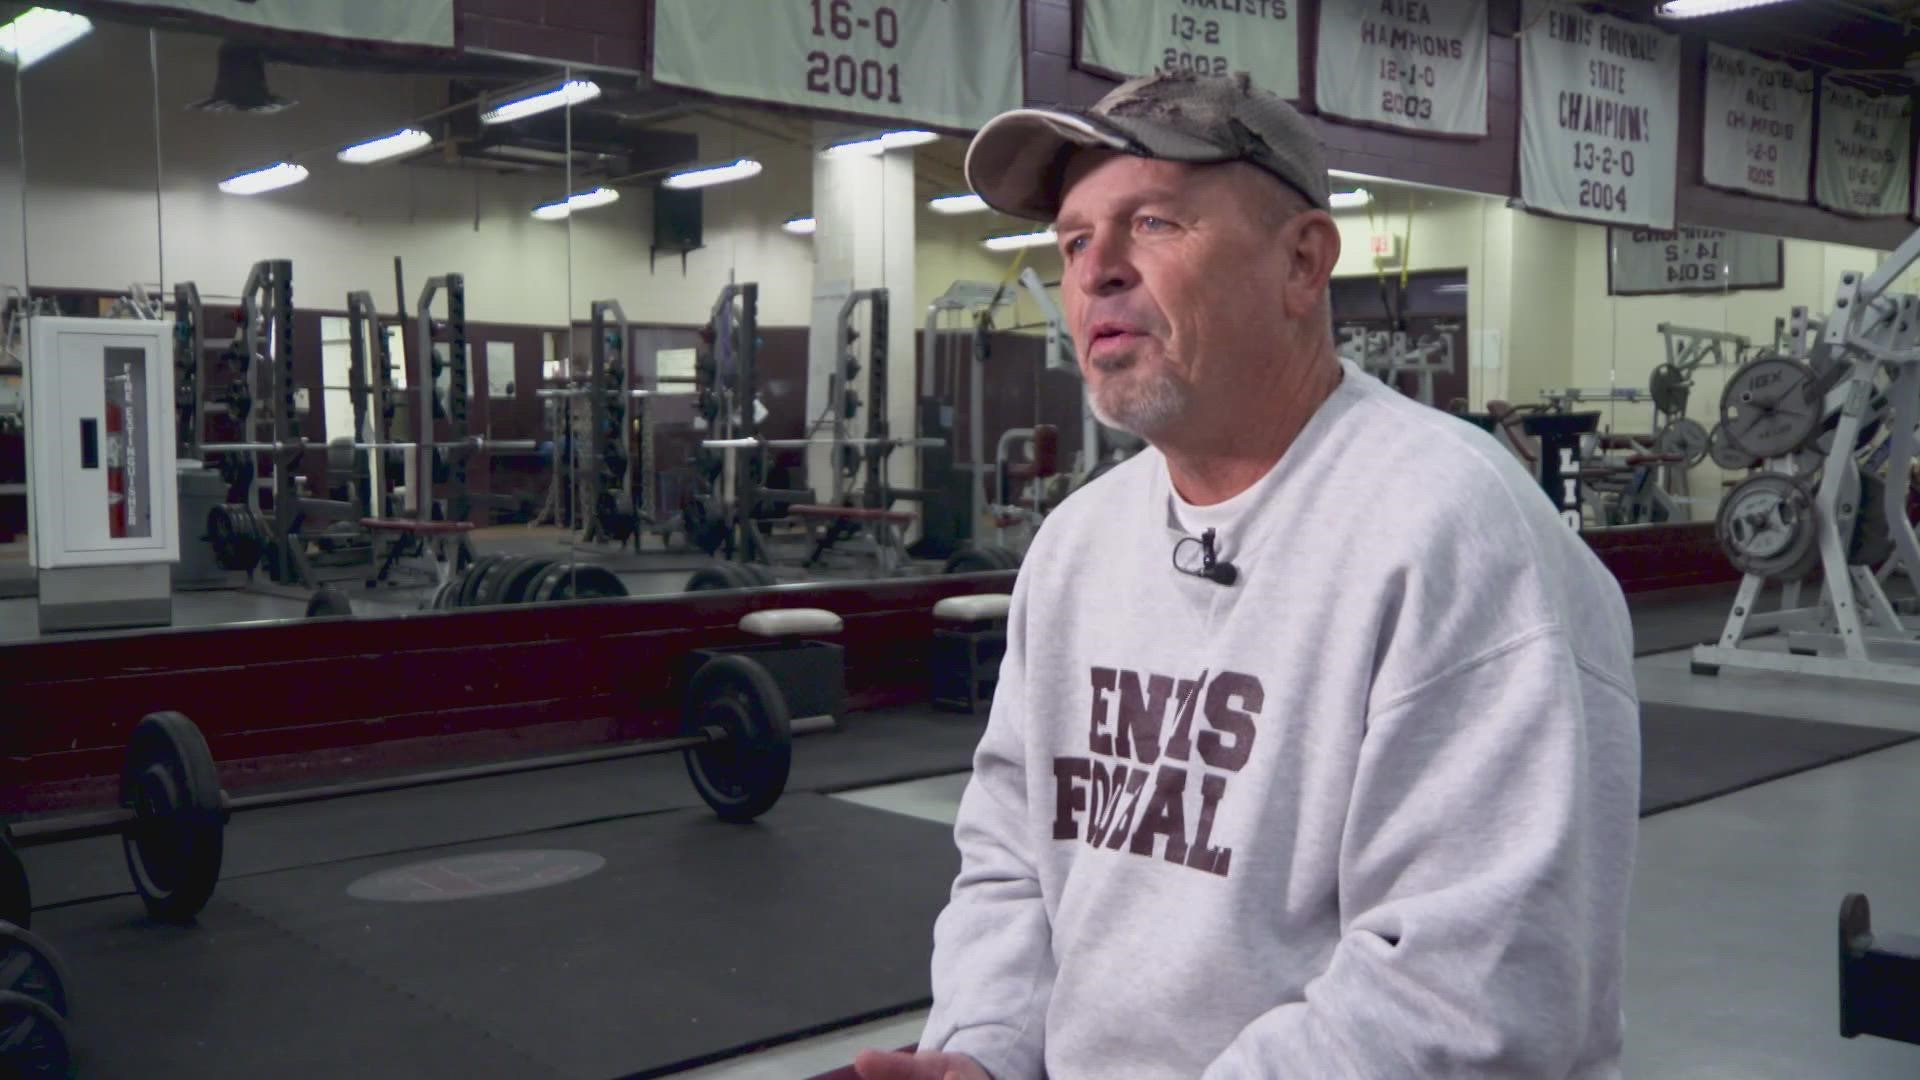 In 1982, Paul Willingham started coaching for the Ennis Independent School District at the young age of 22. He's stayed put ever since.